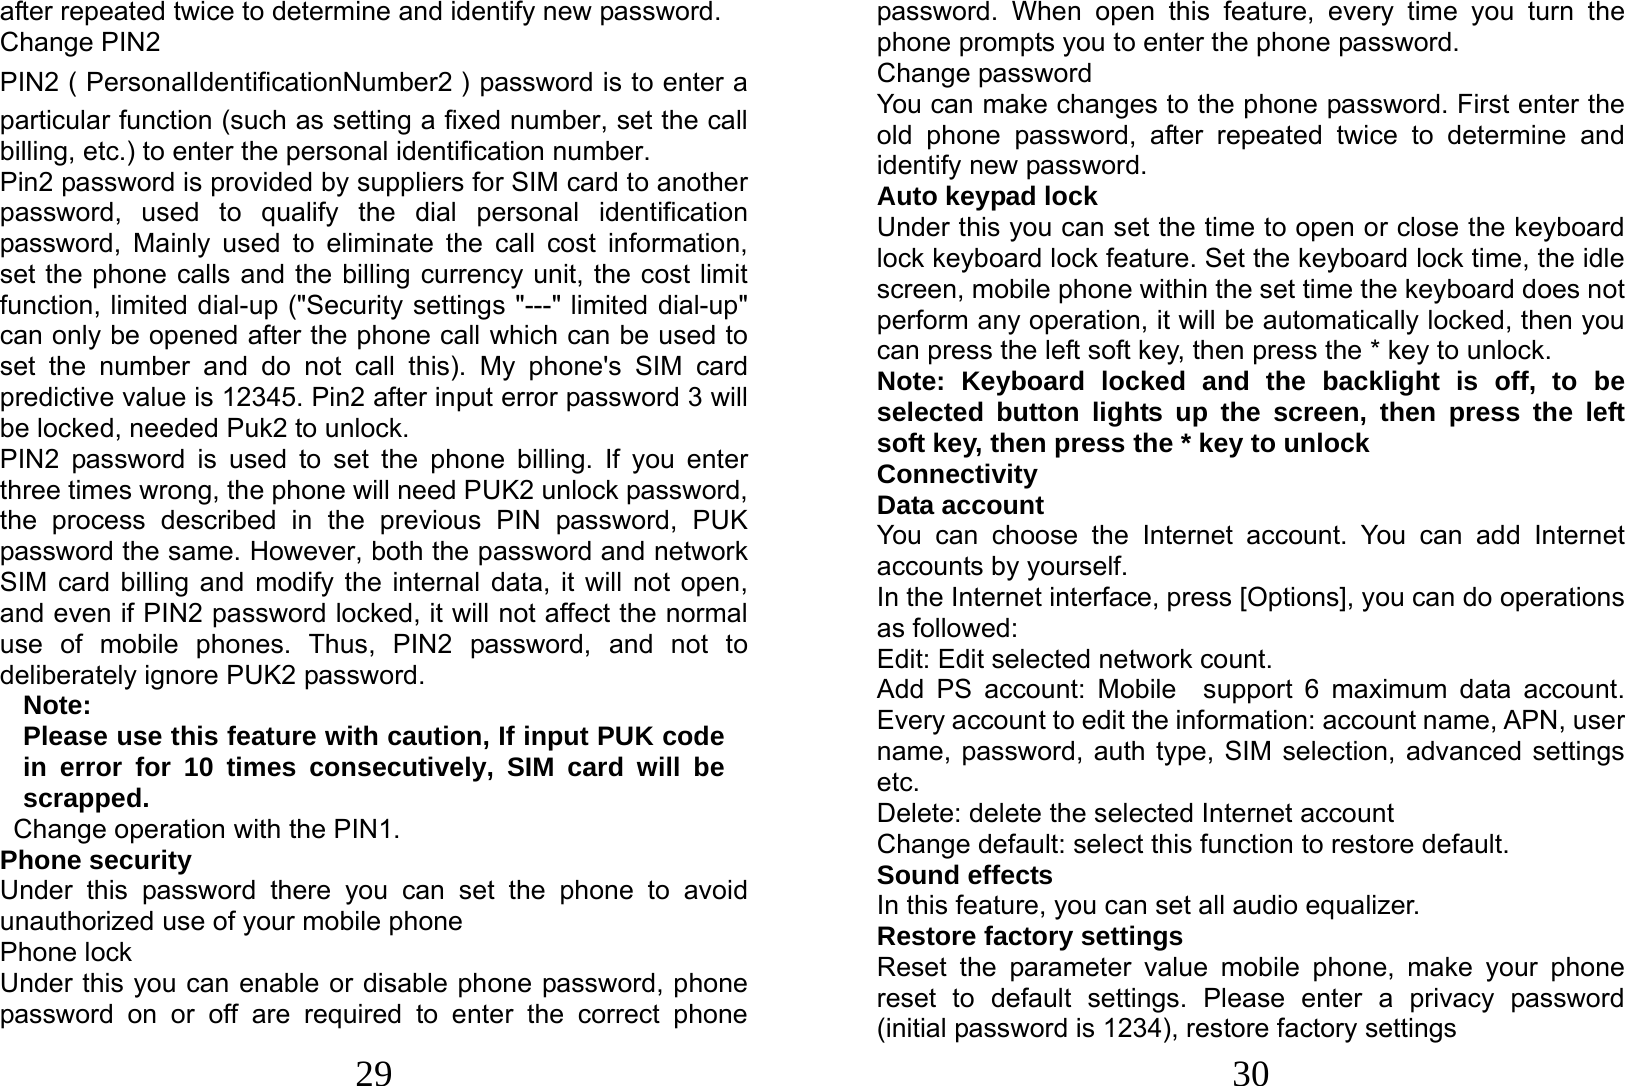  29 after repeated twice to determine and identify new password. Change PIN2 PIN2（PersonalIdentificationNumber2）password is to enter a particular function (such as setting a fixed number, set the call billing, etc.) to enter the personal identification number. Pin2 password is provided by suppliers for SIM card to another password, used to qualify the dial personal identification password, Mainly used to eliminate the call cost information, set the phone calls and the billing currency unit, the cost limit function, limited dial-up (&quot;Security settings &quot;---&quot; limited dial-up&quot; can only be opened after the phone call which can be used to set the number and do not call this). My phone&apos;s SIM card predictive value is 12345. Pin2 after input error password 3 will be locked, needed Puk2 to unlock. PIN2 password is used to set the phone billing. If you enter three times wrong, the phone will need PUK2 unlock password, the process described in the previous PIN password, PUK password the same. However, both the password and network SIM card billing and modify the internal data, it will not open, and even if PIN2 password locked, it will not affect the normal use of mobile phones. Thus, PIN2 password, and not to deliberately ignore PUK2 password. Note:  Please use this feature with caution, If input PUK code in error for 10 times consecutively, SIM card will be scrapped.  Change operation with the PIN1. Phone security Under this password there you can set the phone to avoid unauthorized use of your mobile phone Phone lock Under this you can enable or disable phone password, phone password on or off are required to enter the correct phone  30 password. When open this feature, every time you turn the phone prompts you to enter the phone password. Change password You can make changes to the phone password. First enter the old phone password, after repeated twice to determine and identify new password. Auto keypad lock Under this you can set the time to open or close the keyboard lock keyboard lock feature. Set the keyboard lock time, the idle screen, mobile phone within the set time the keyboard does not perform any operation, it will be automatically locked, then you can press the left soft key, then press the * key to unlock. Note: Keyboard locked and the backlight is off, to be selected button lights up the screen, then press the left soft key, then press the * key to unlock  Connectivity Data account You can choose the Internet account. You can add Internet accounts by yourself.   In the Internet interface, press [Options], you can do operations as followed:   Edit: Edit selected network count. Add PS account: Mobile  support 6 maximum data account. Every account to edit the information: account name, APN, user name, password, auth type, SIM selection, advanced settings etc. Delete: delete the selected Internet account Change default: select this function to restore default.   Sound effects In this feature, you can set all audio equalizer. Restore factory settings Reset the parameter value mobile phone, make your phone reset to default settings. Please enter a privacy password (initial password is 1234), restore factory settings 